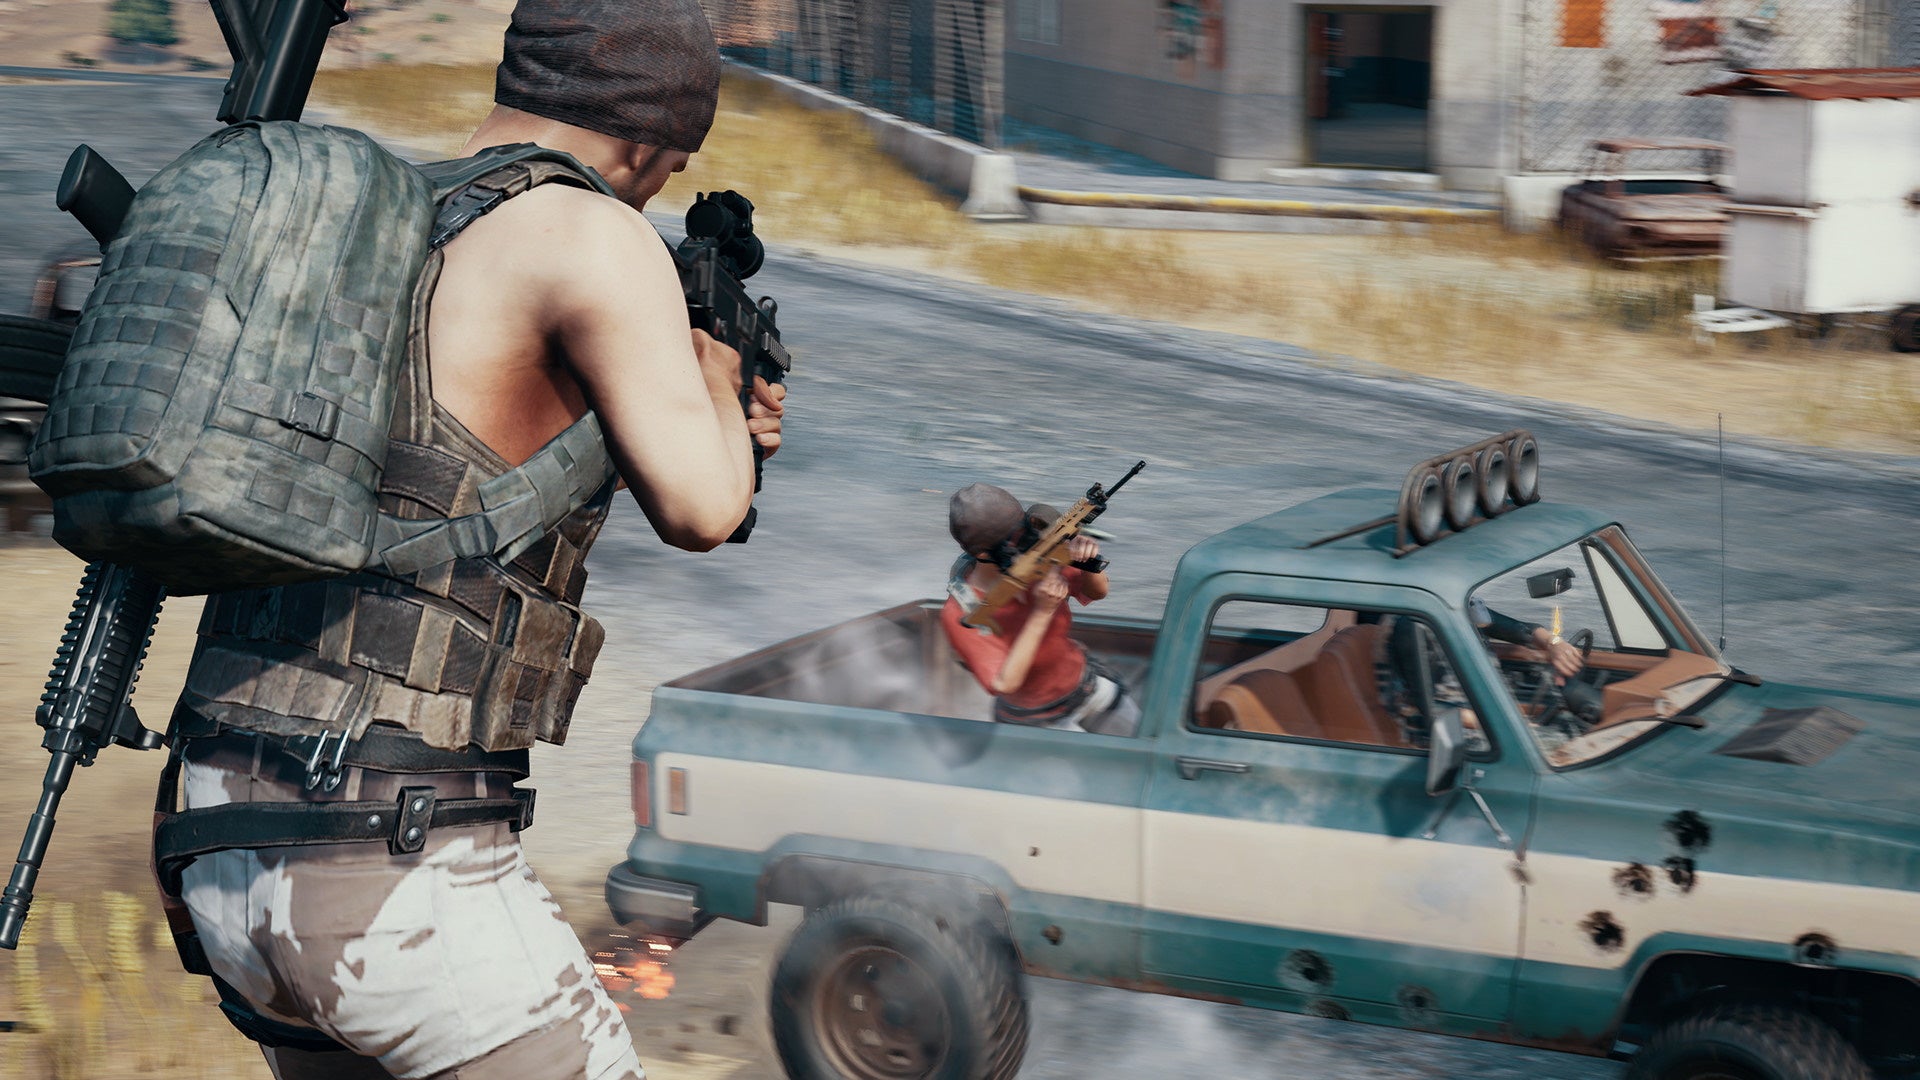 PUBG is going free-to-play next year